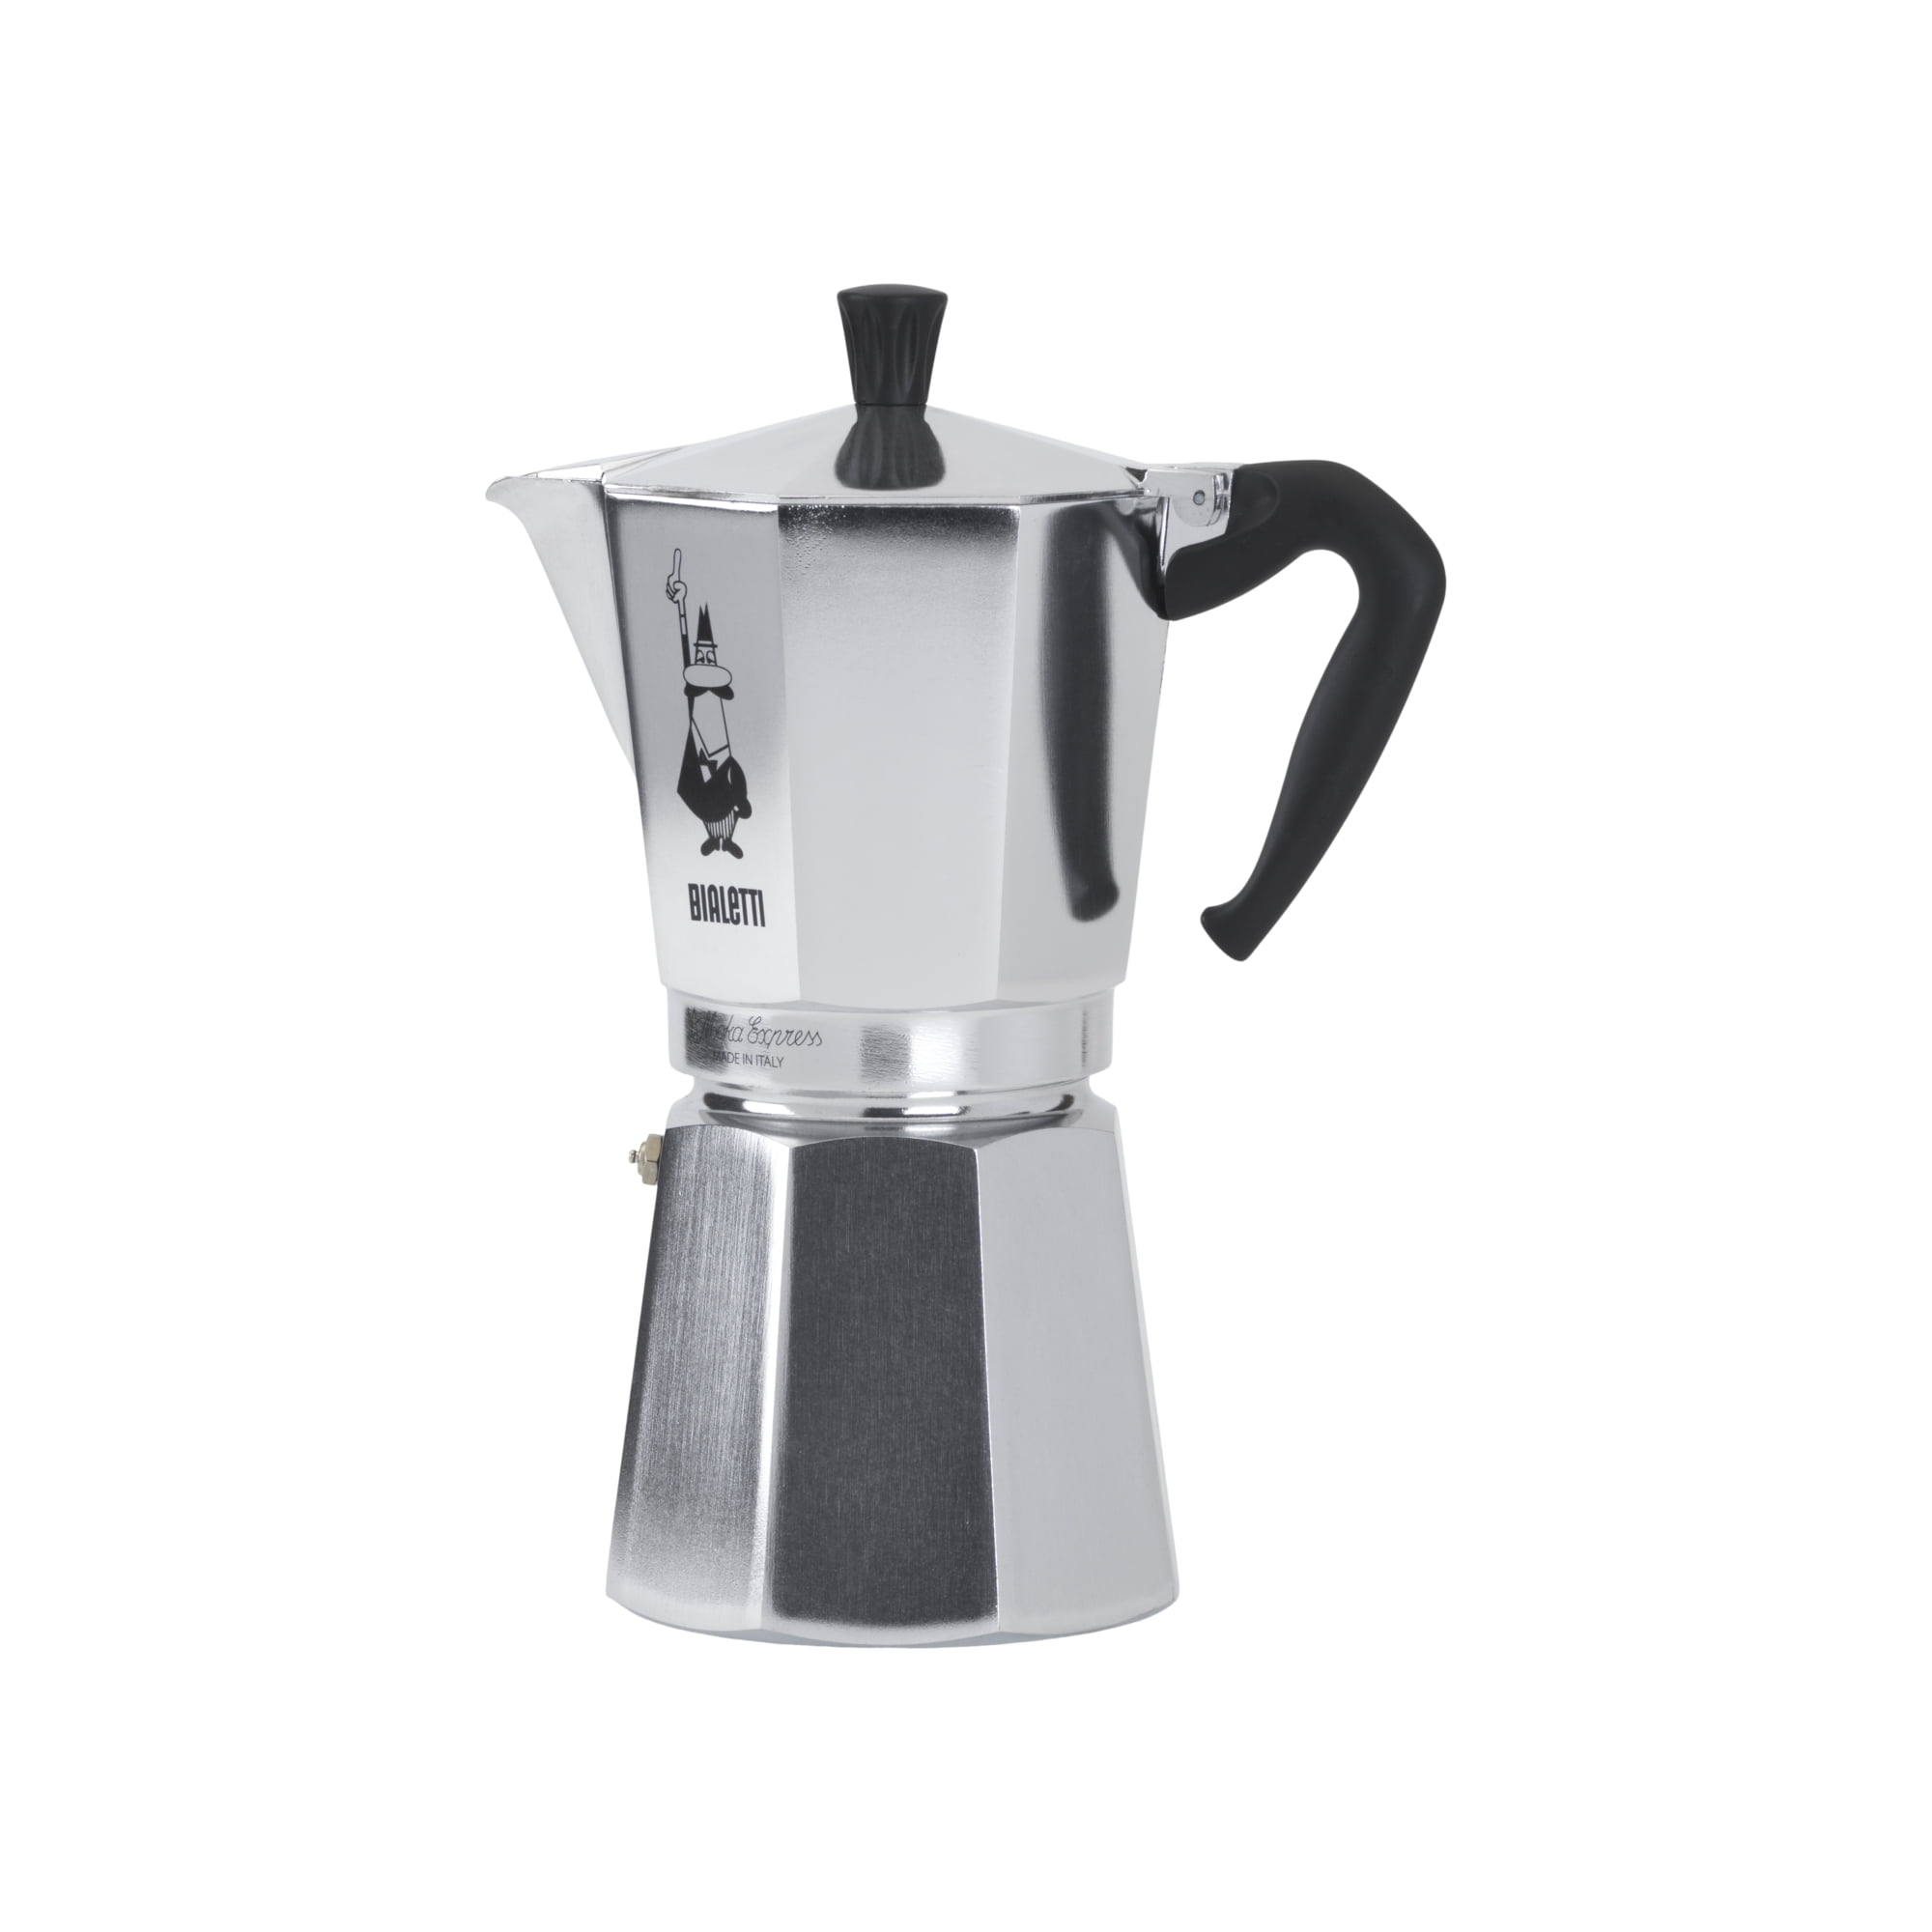  Bialetti (35061) 12 Cup Programmable Coffee Maker, Stainless  Steel: Home & Kitchen